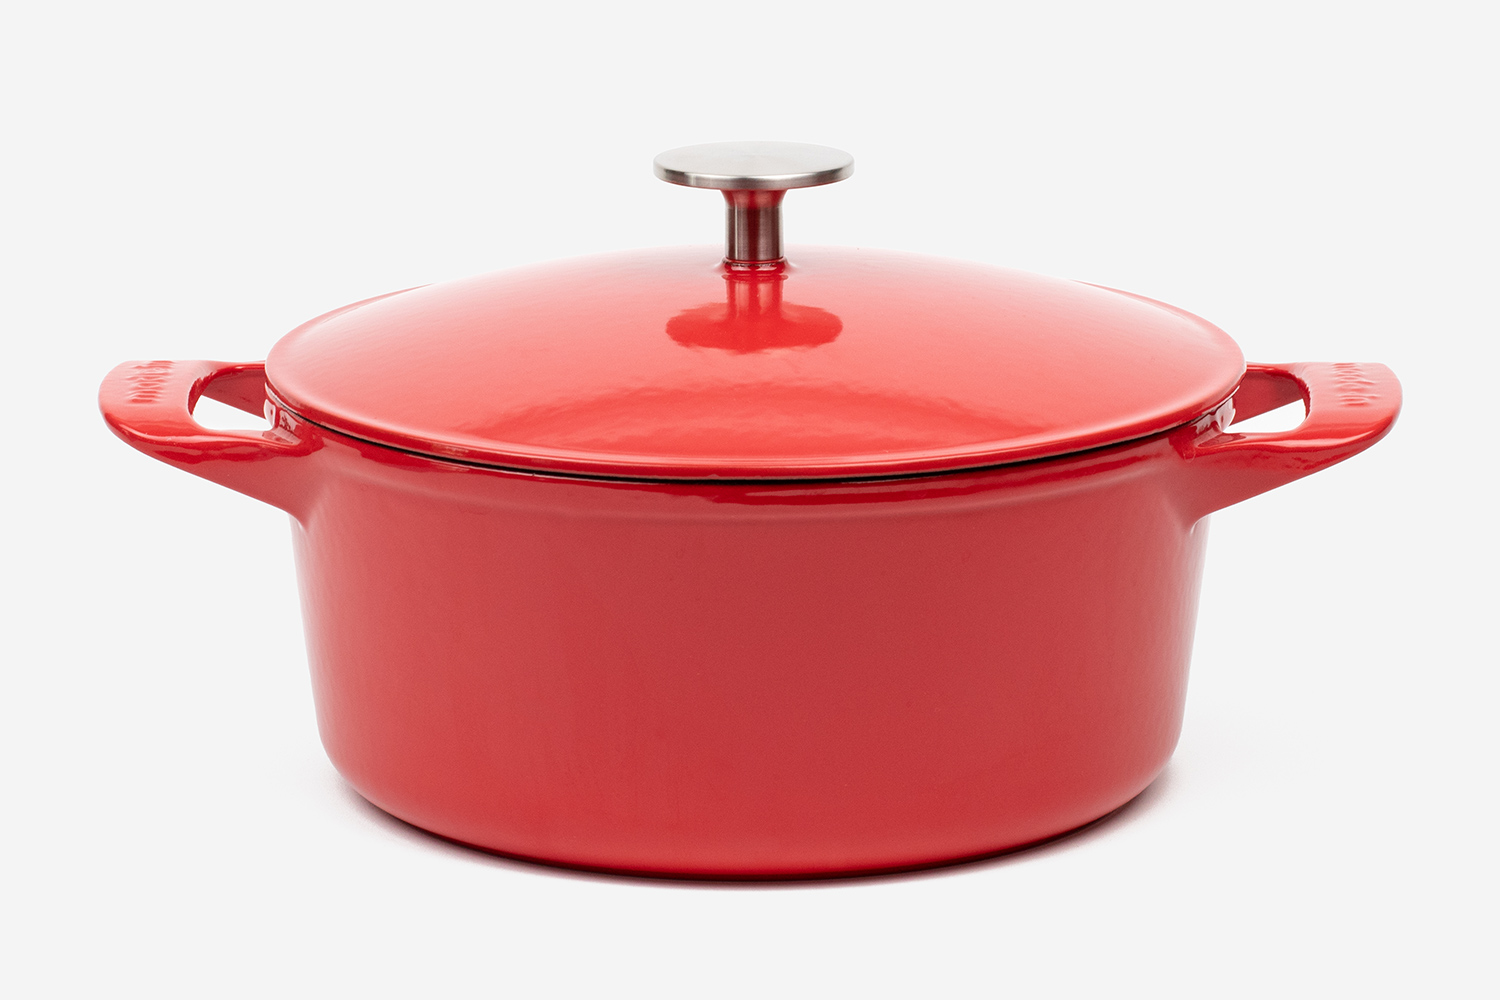 The 10 best Dutch ovens of 2022